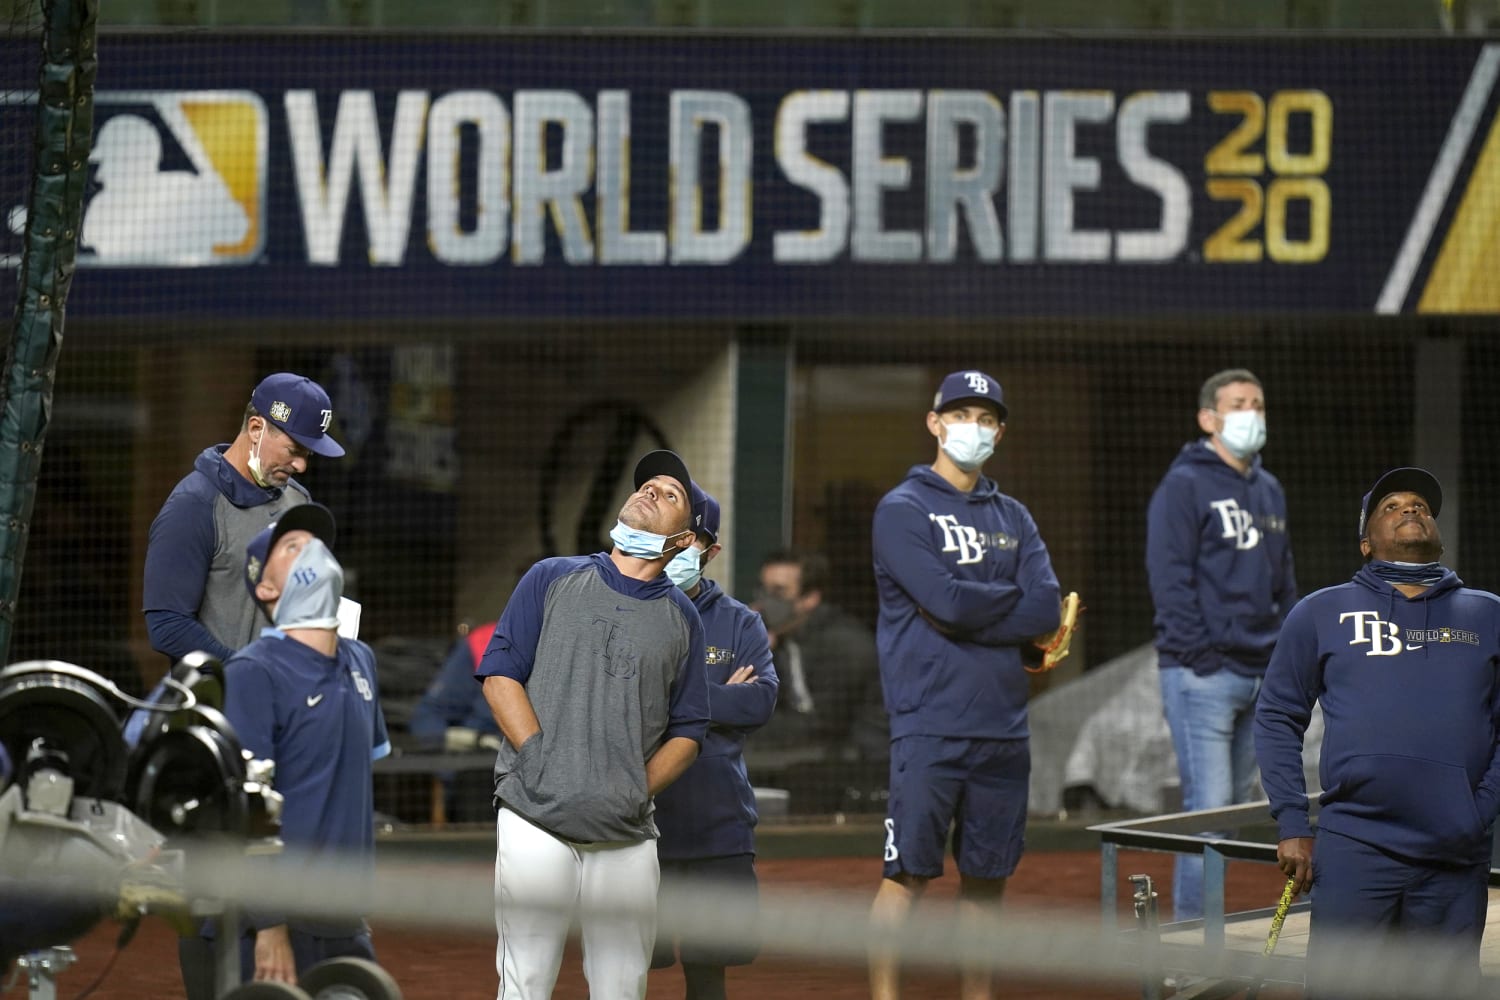 Dodgers-Rays: How did MLB pull off World Series with pandemic?